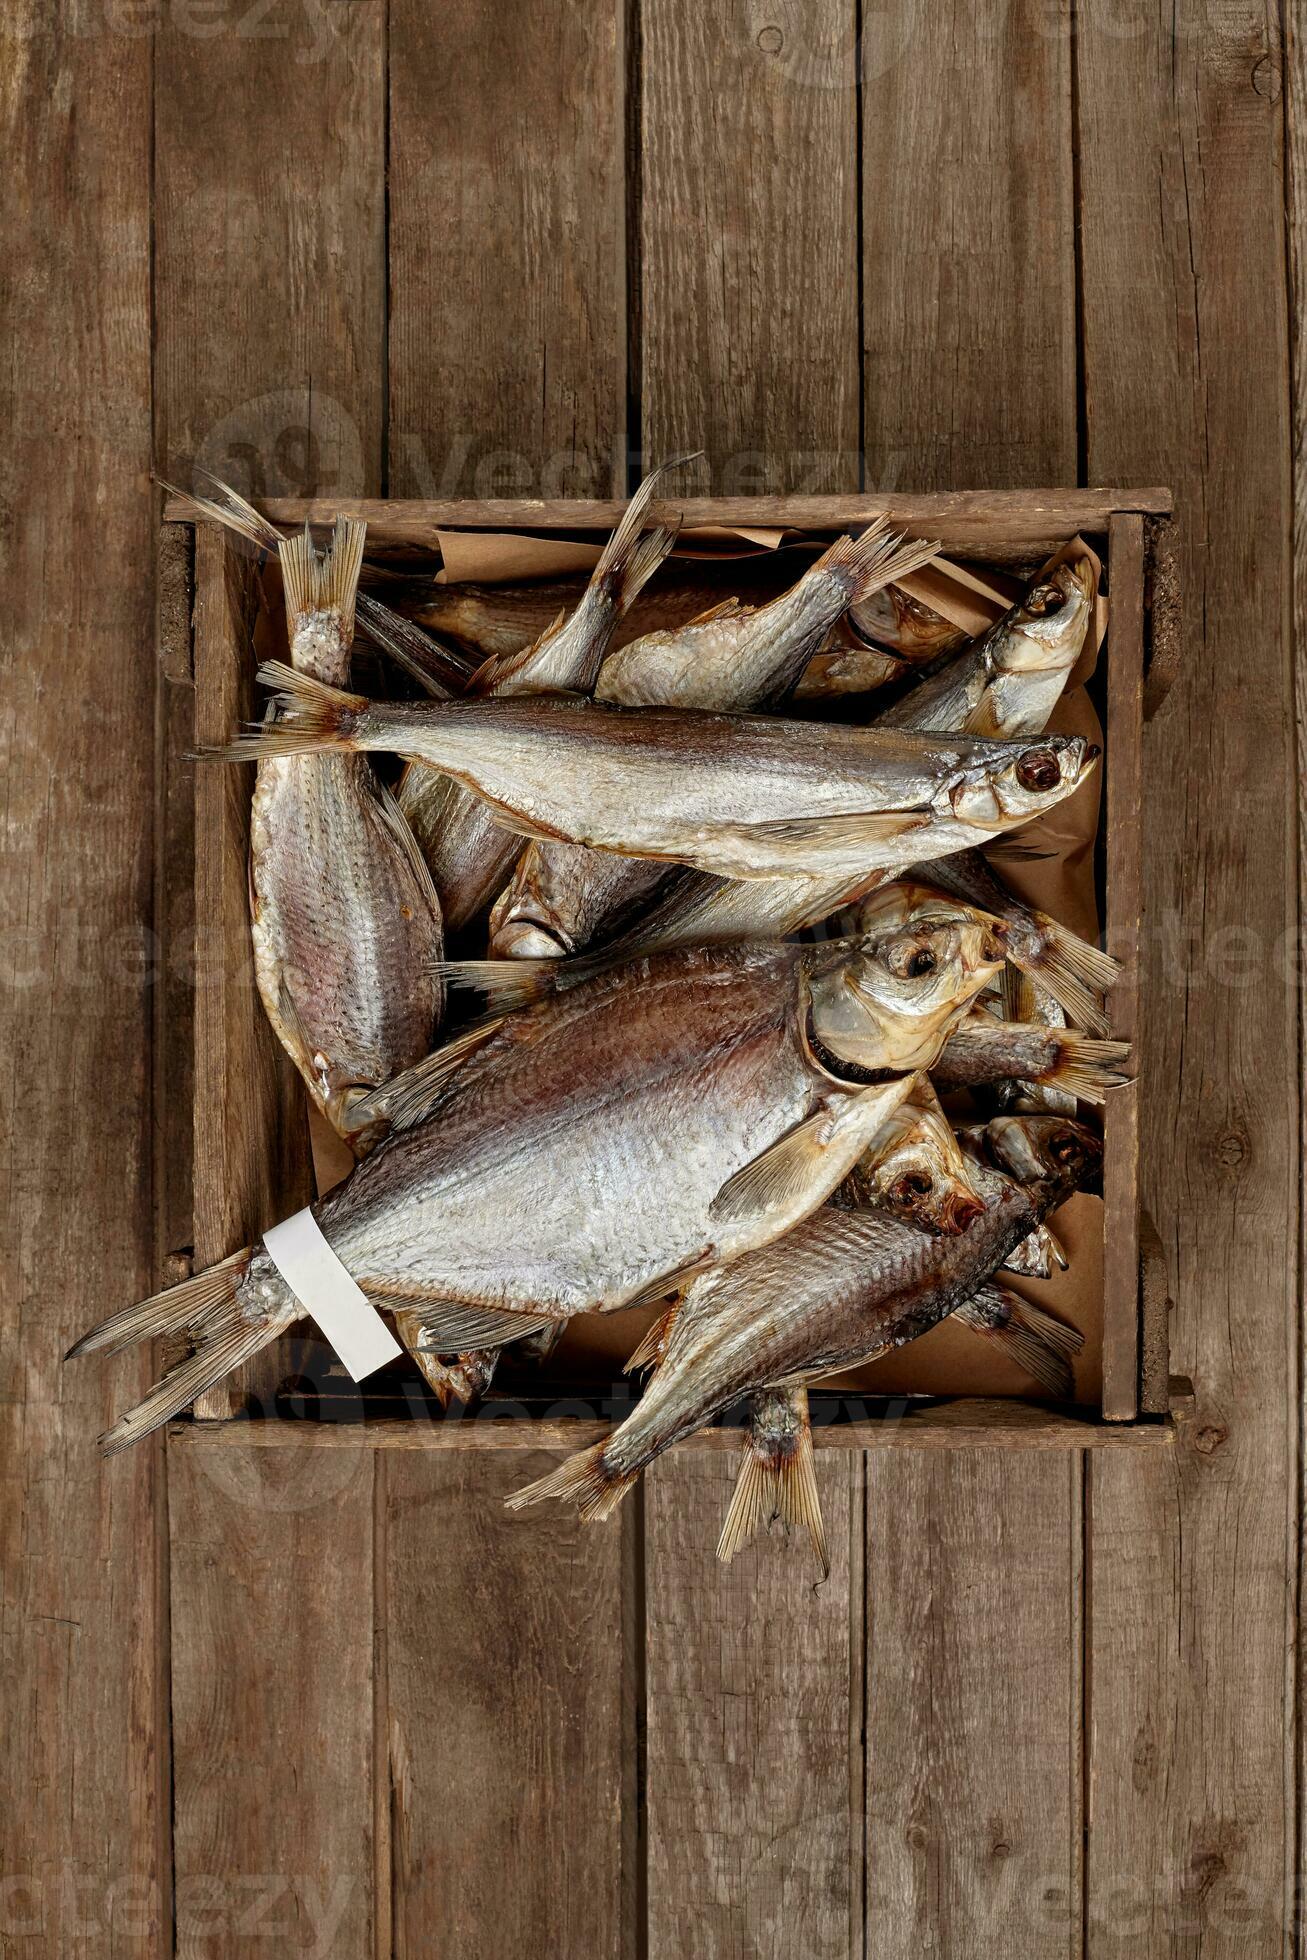 Crate with various sun-dried fish on wooden planks background